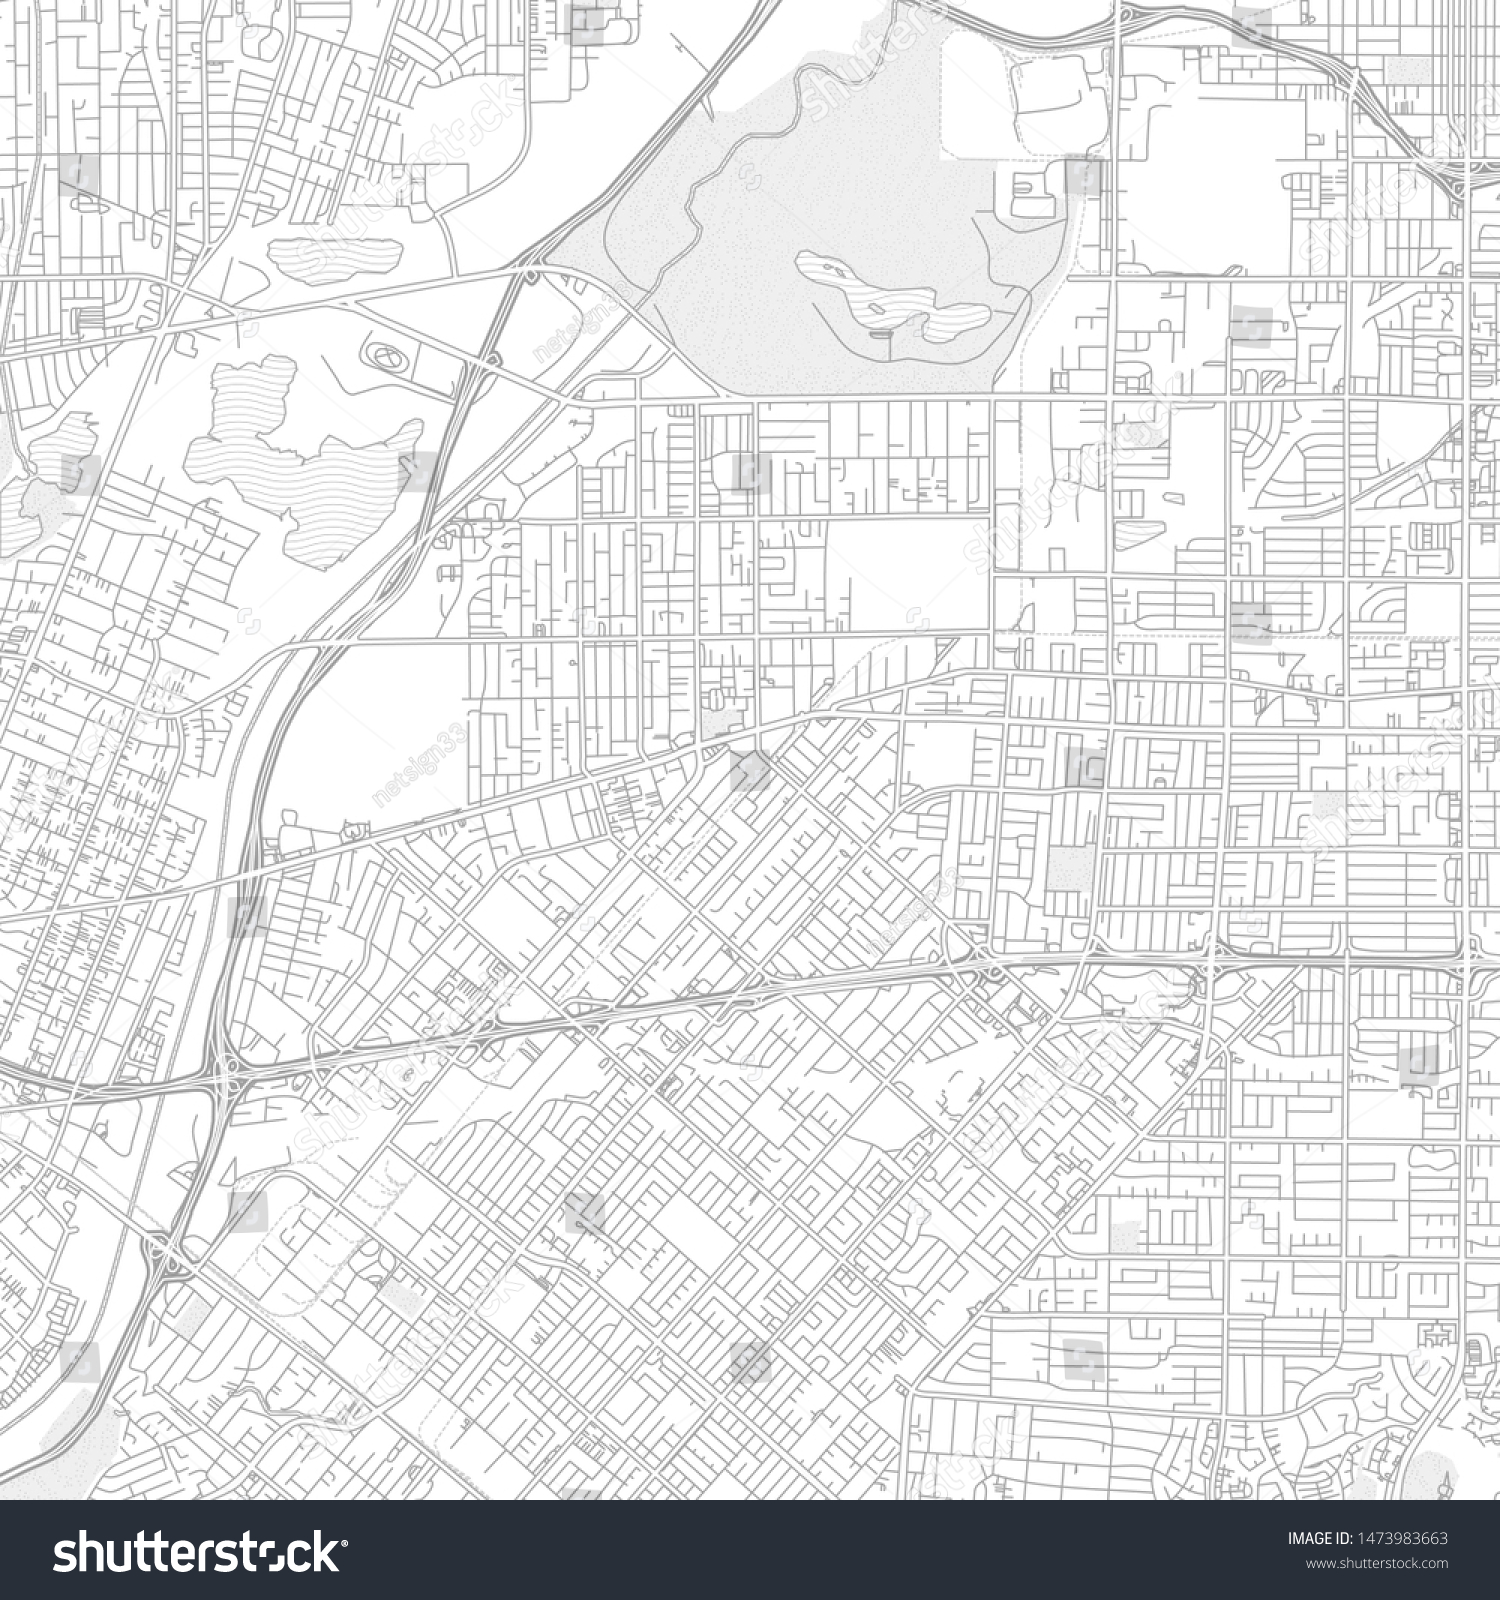 Stock Vector Baldwin Park California Usa Bright Outlined Vector Map With Bigger And Minor Roads And Steets 1473983663 